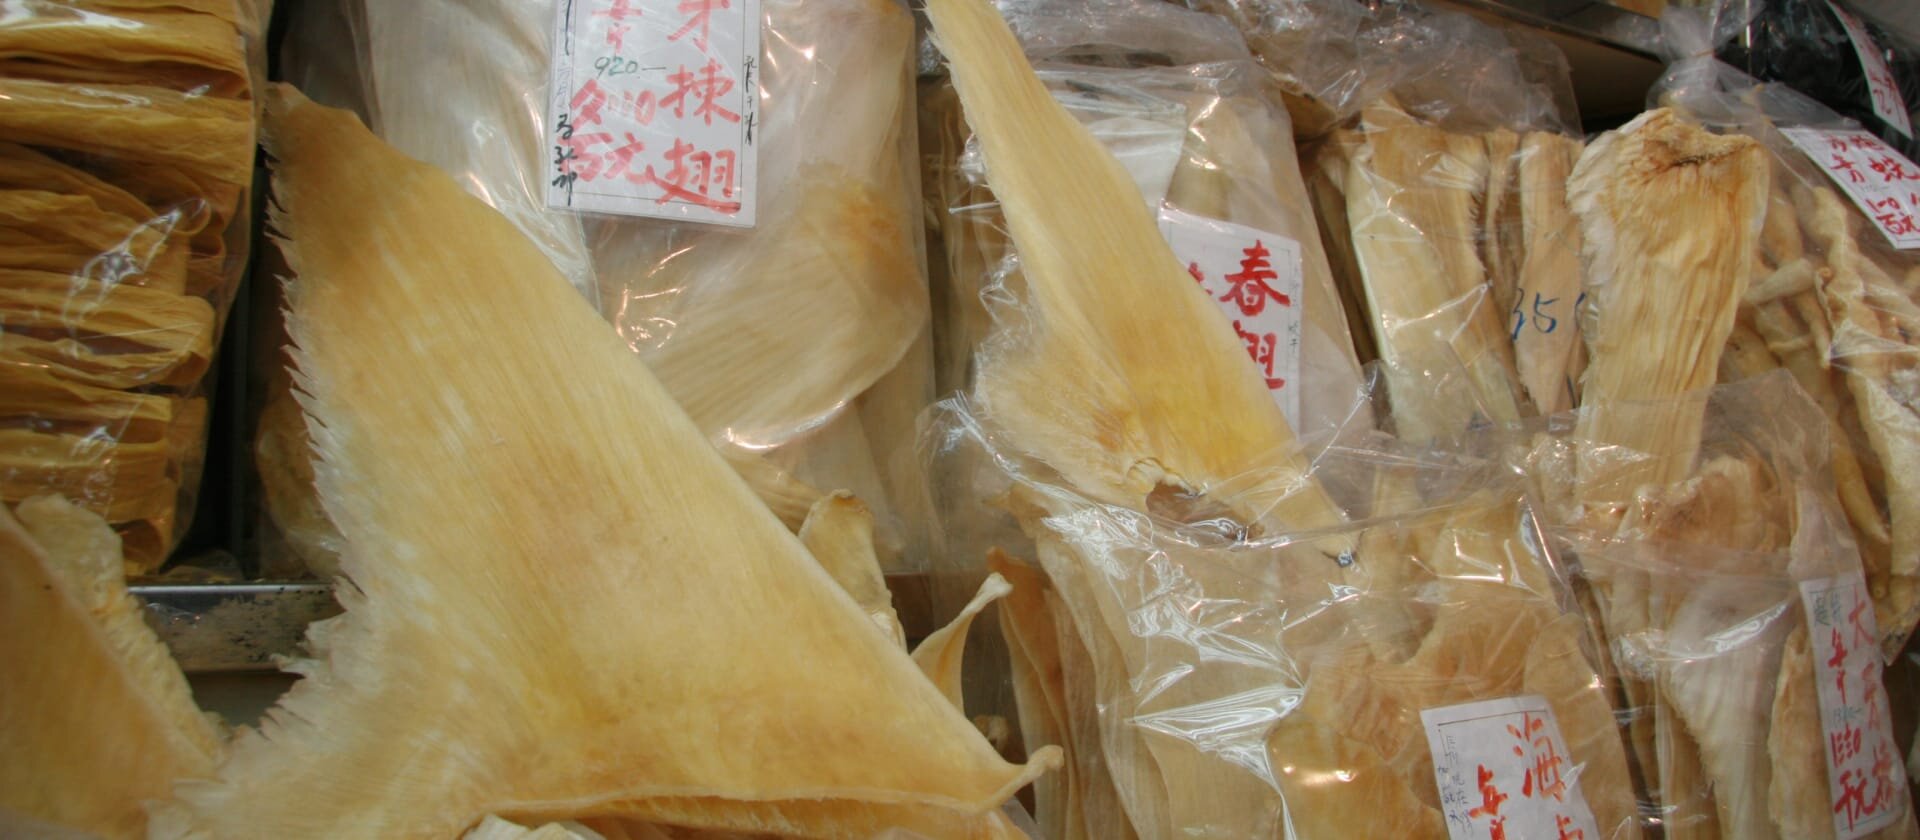 photo of Mercury levels in shark fins illegal and dangerous to human health image